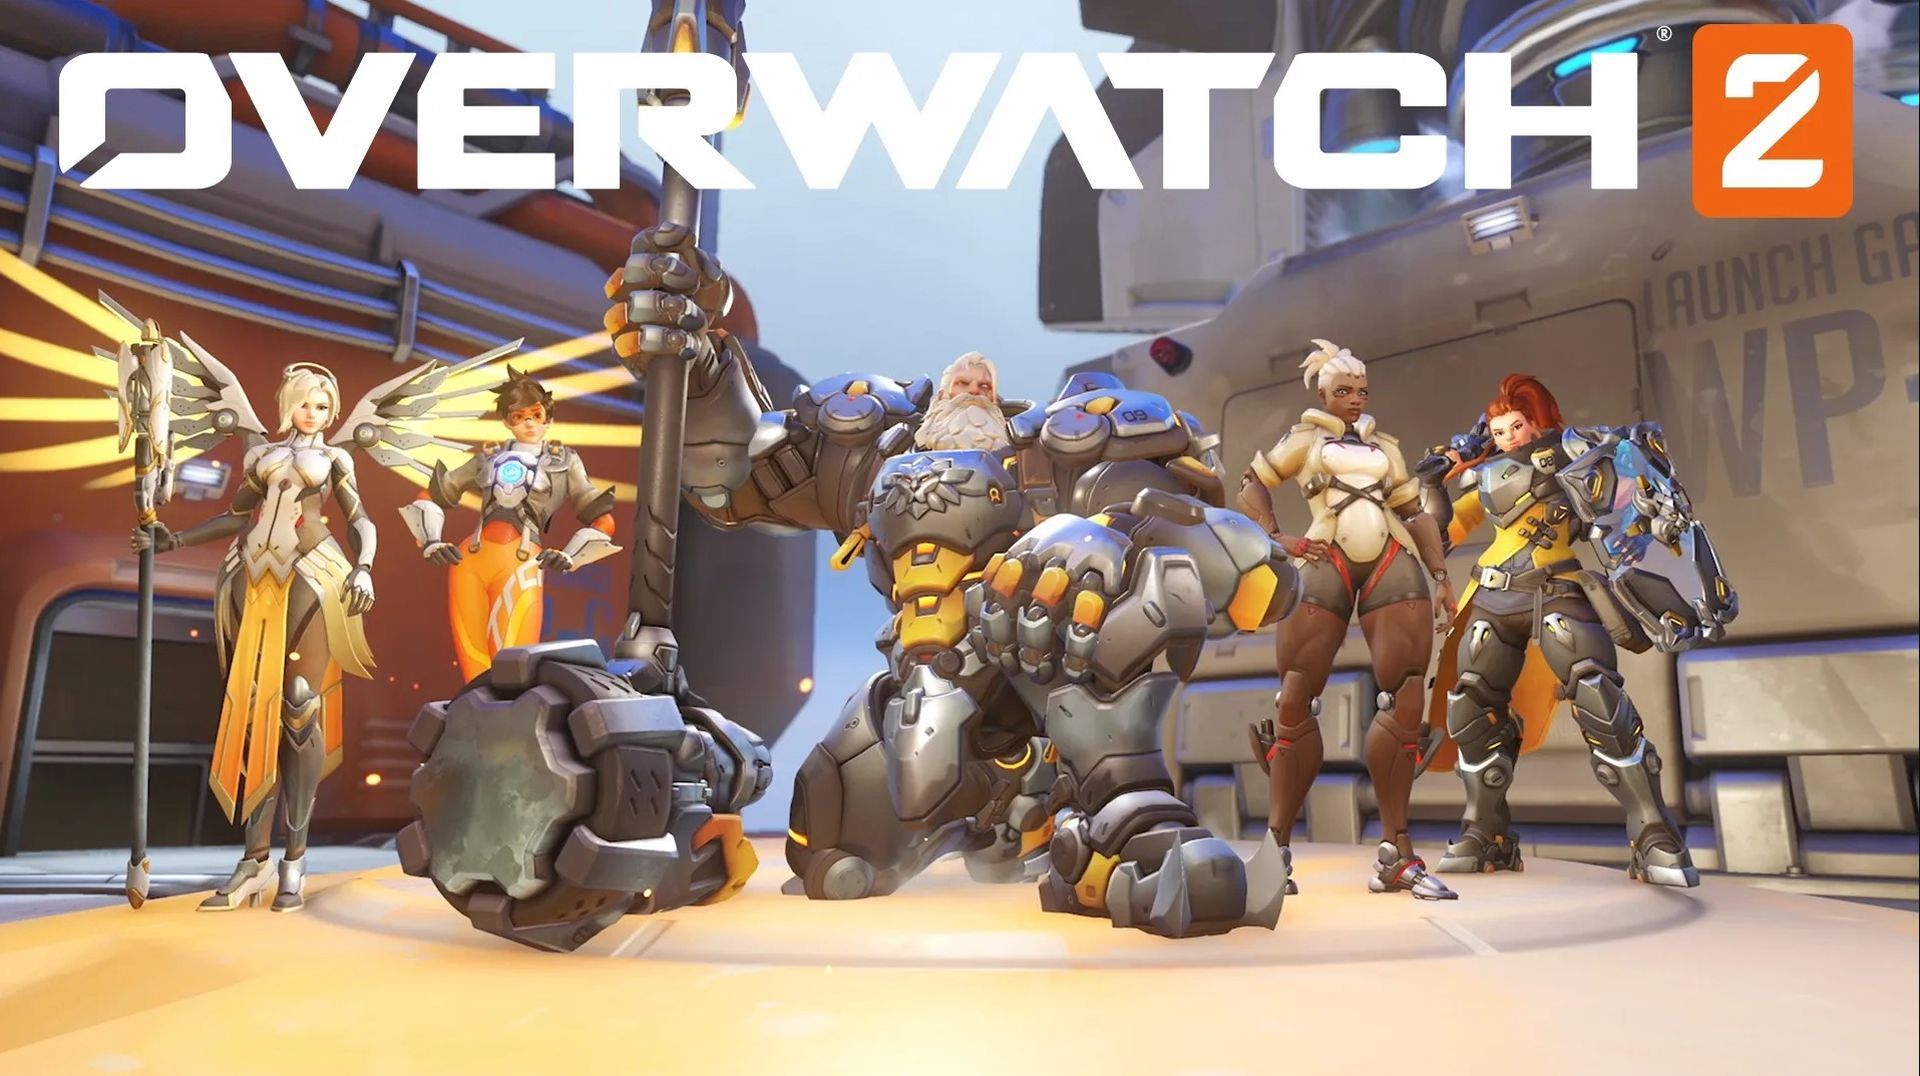 Overwatch 2 campaign release date